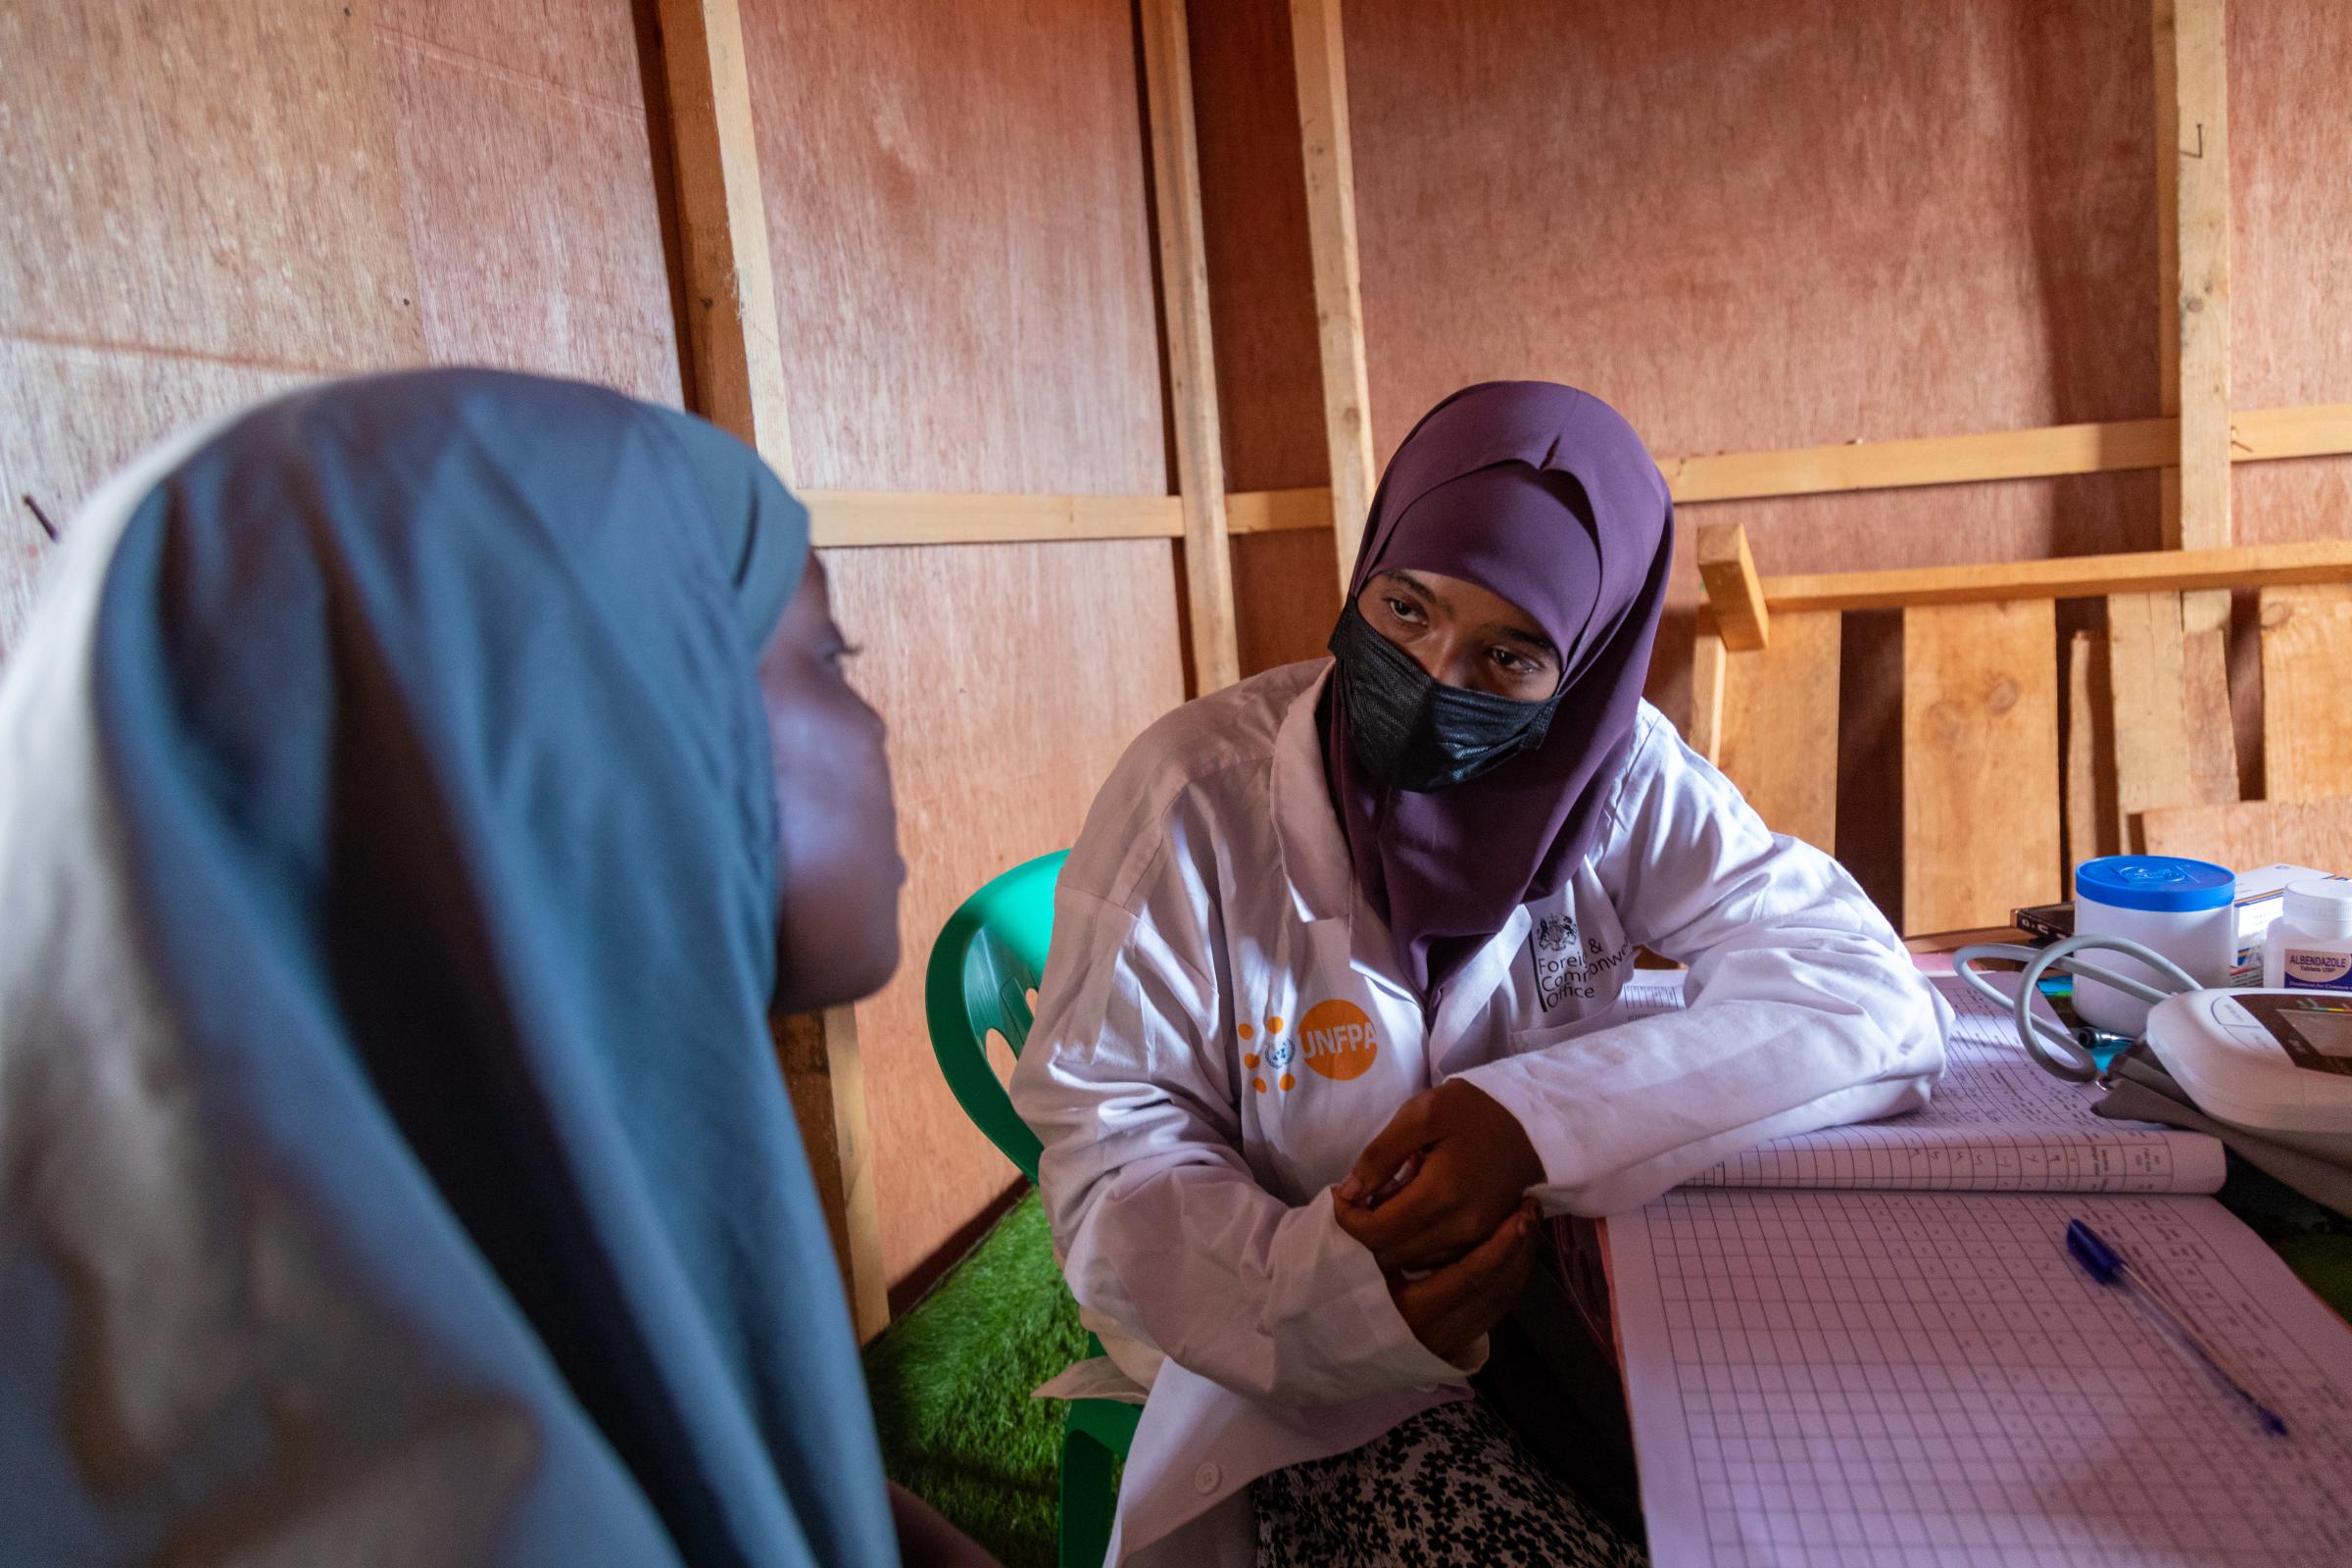 Overcoming Challenges through Healthcare Outreach in Kismayo - Zeina, a midwife supported by UNFPA, compassionately cares for women at the clinic in El JaleIDP...